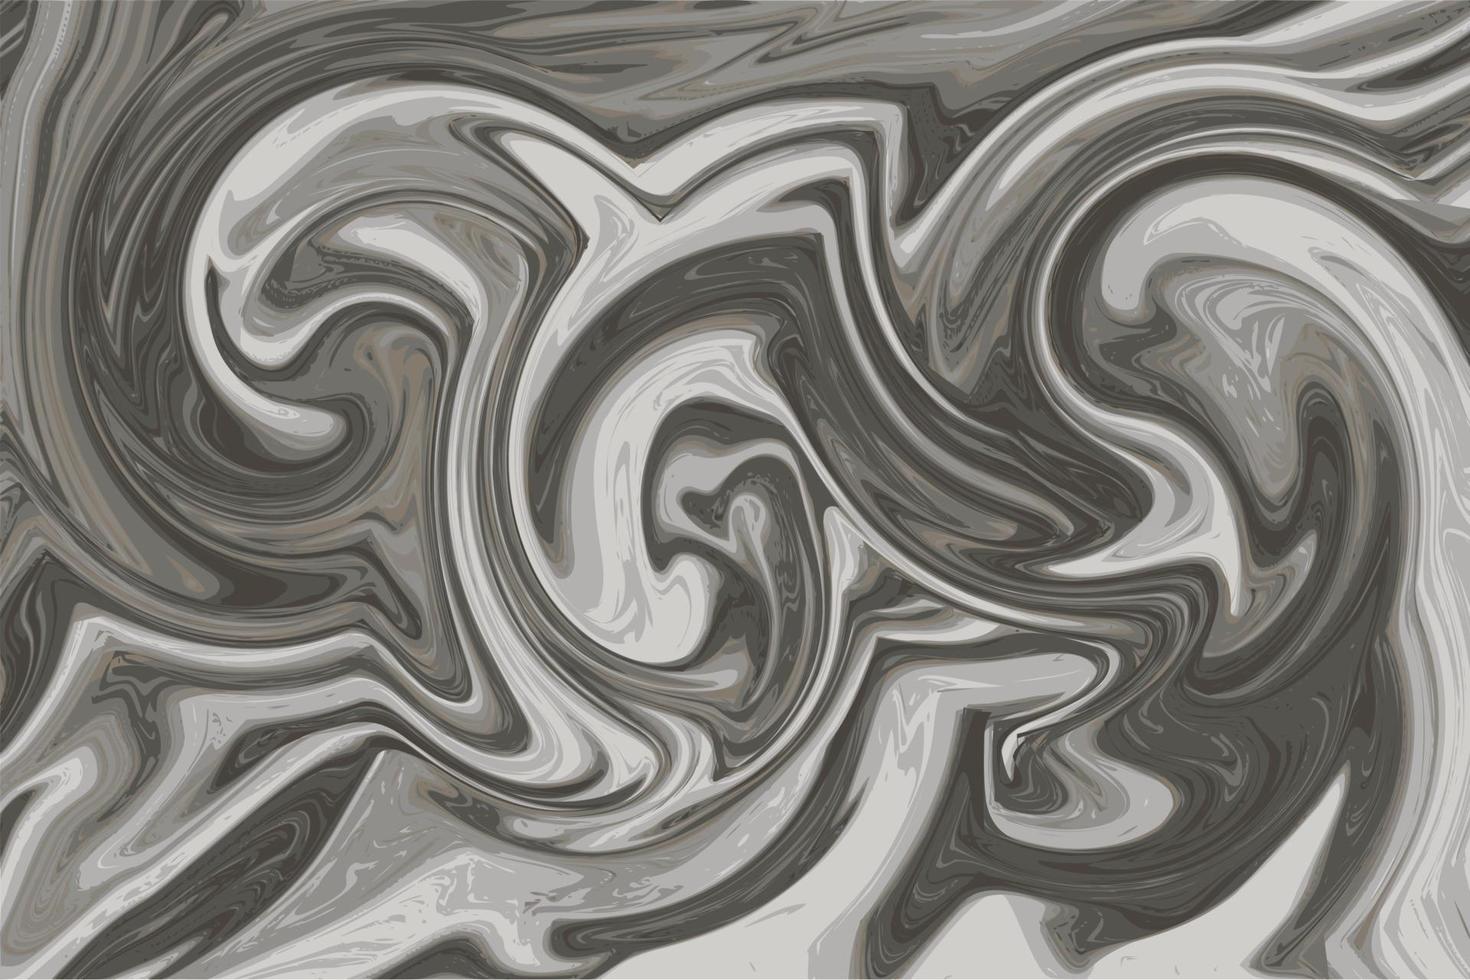 Abstract colorful marble fluid metalic liquid background design. vector